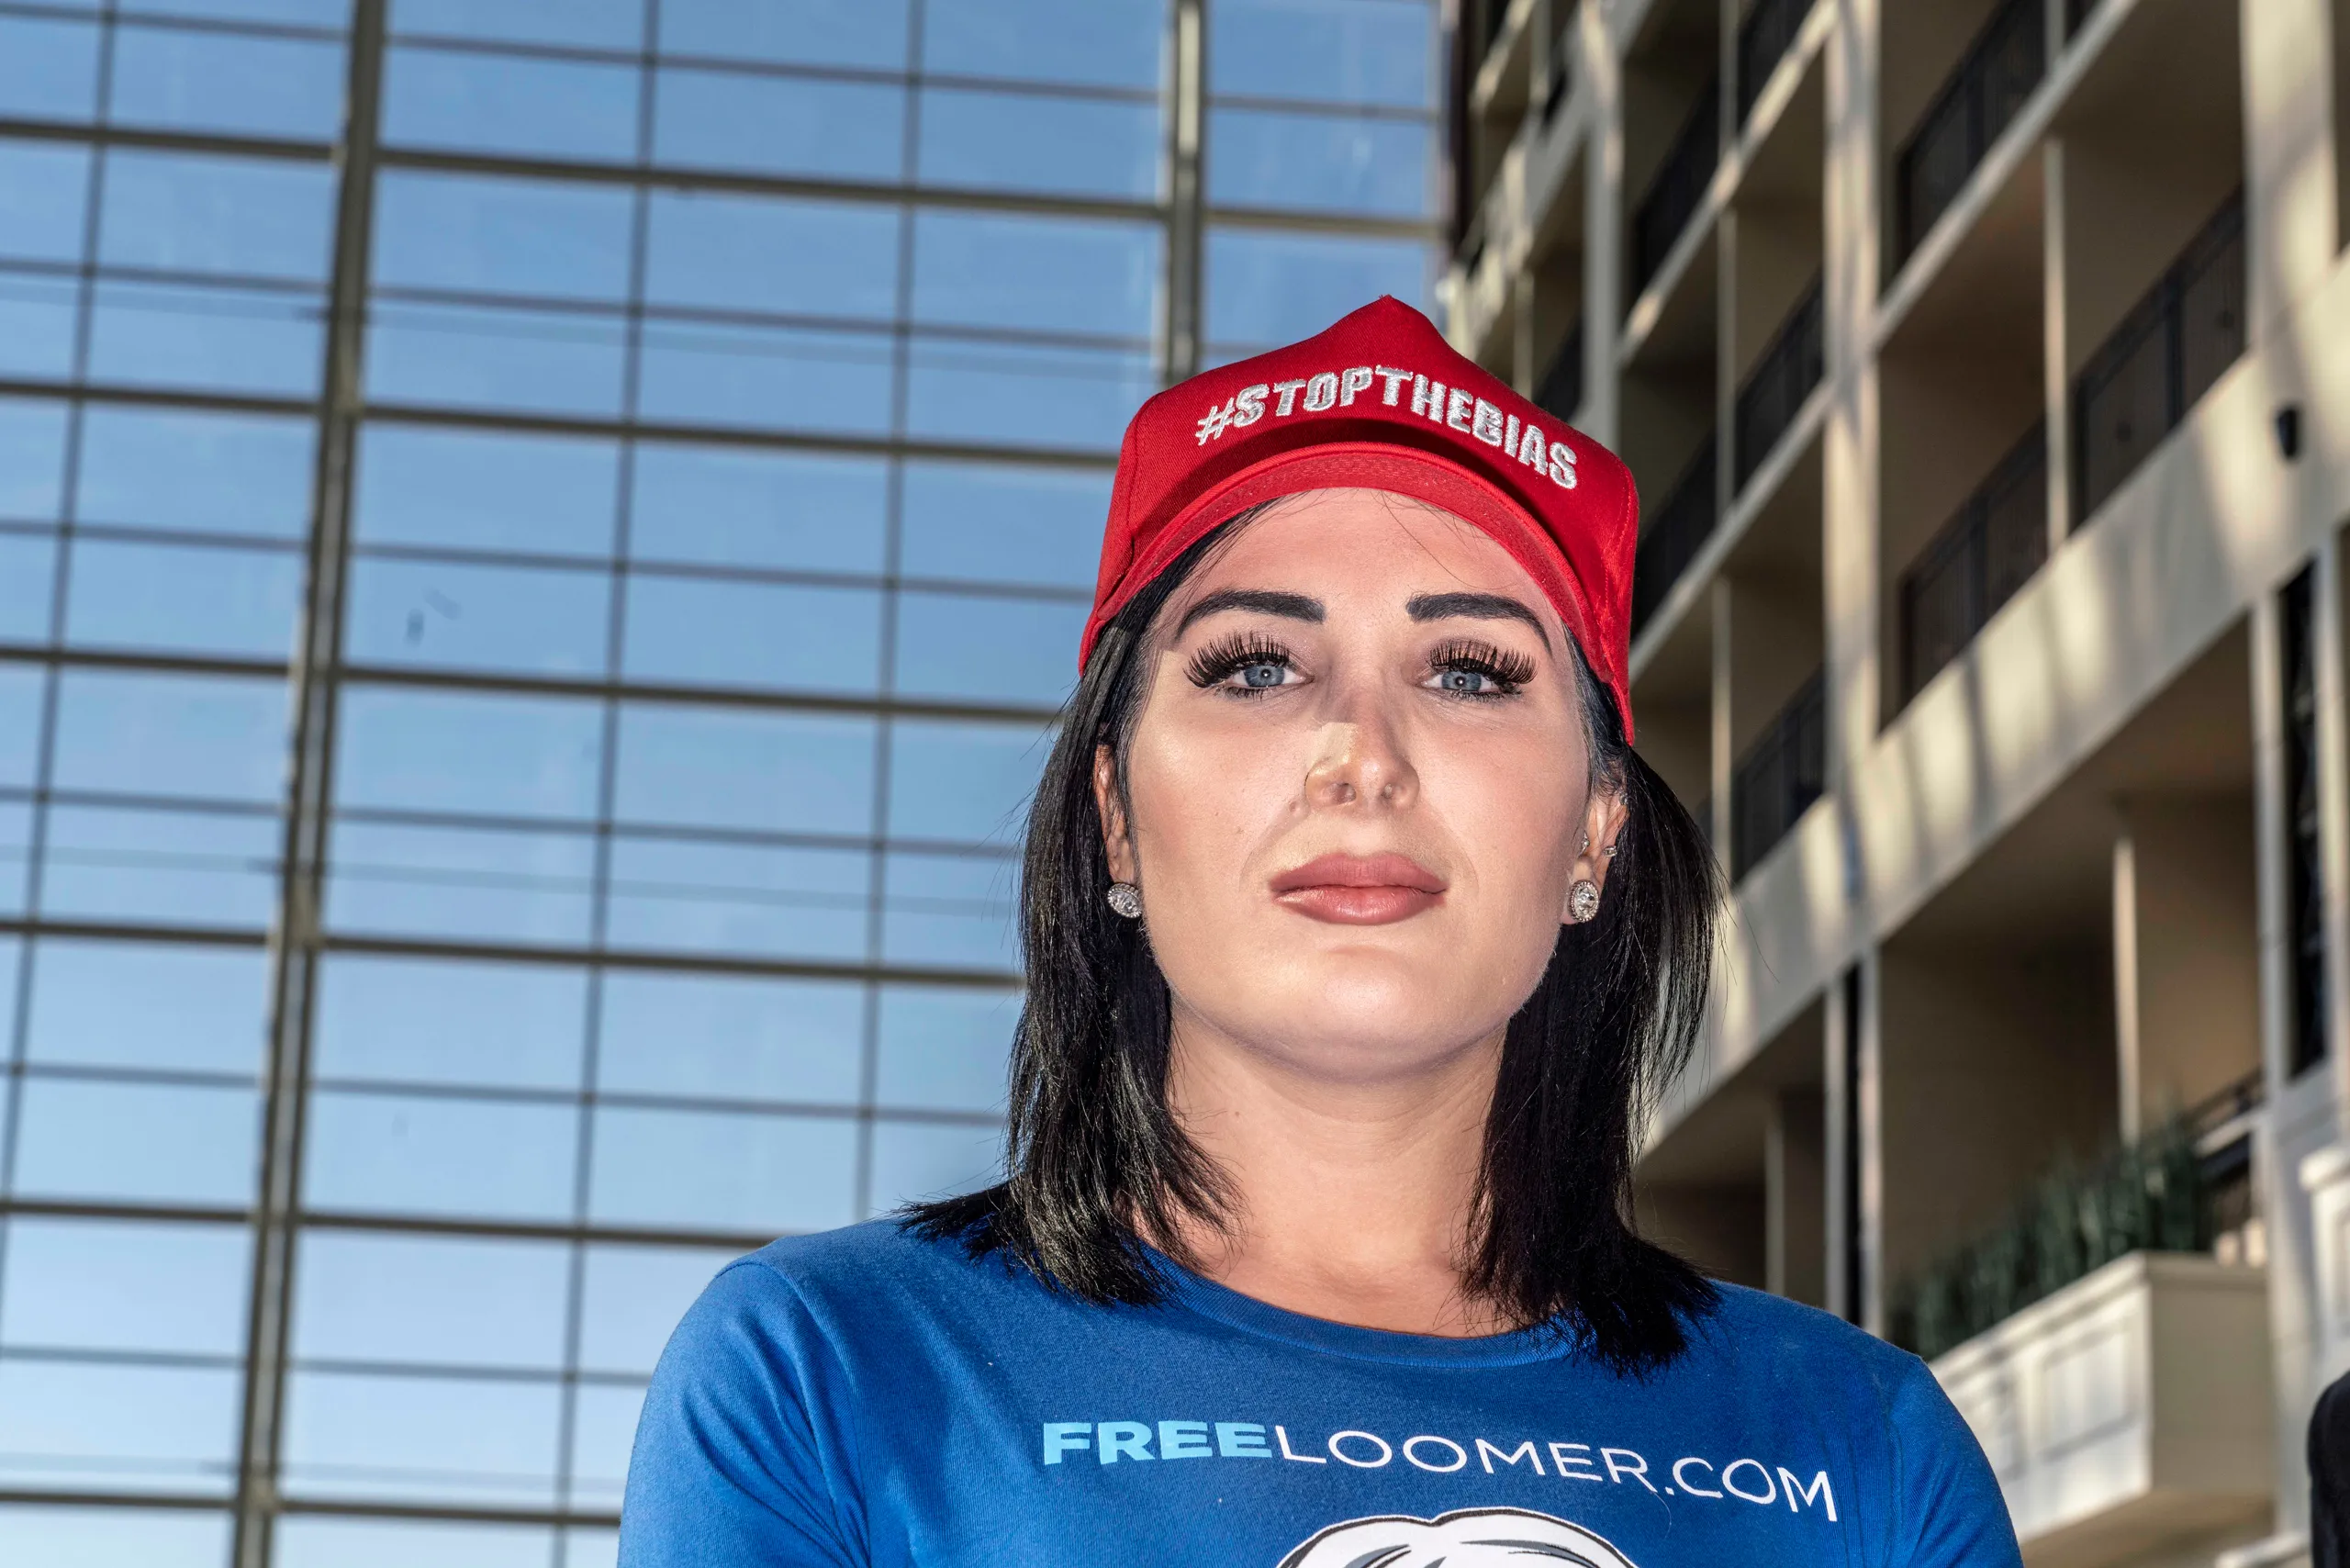 Who Is Laura Loomer?